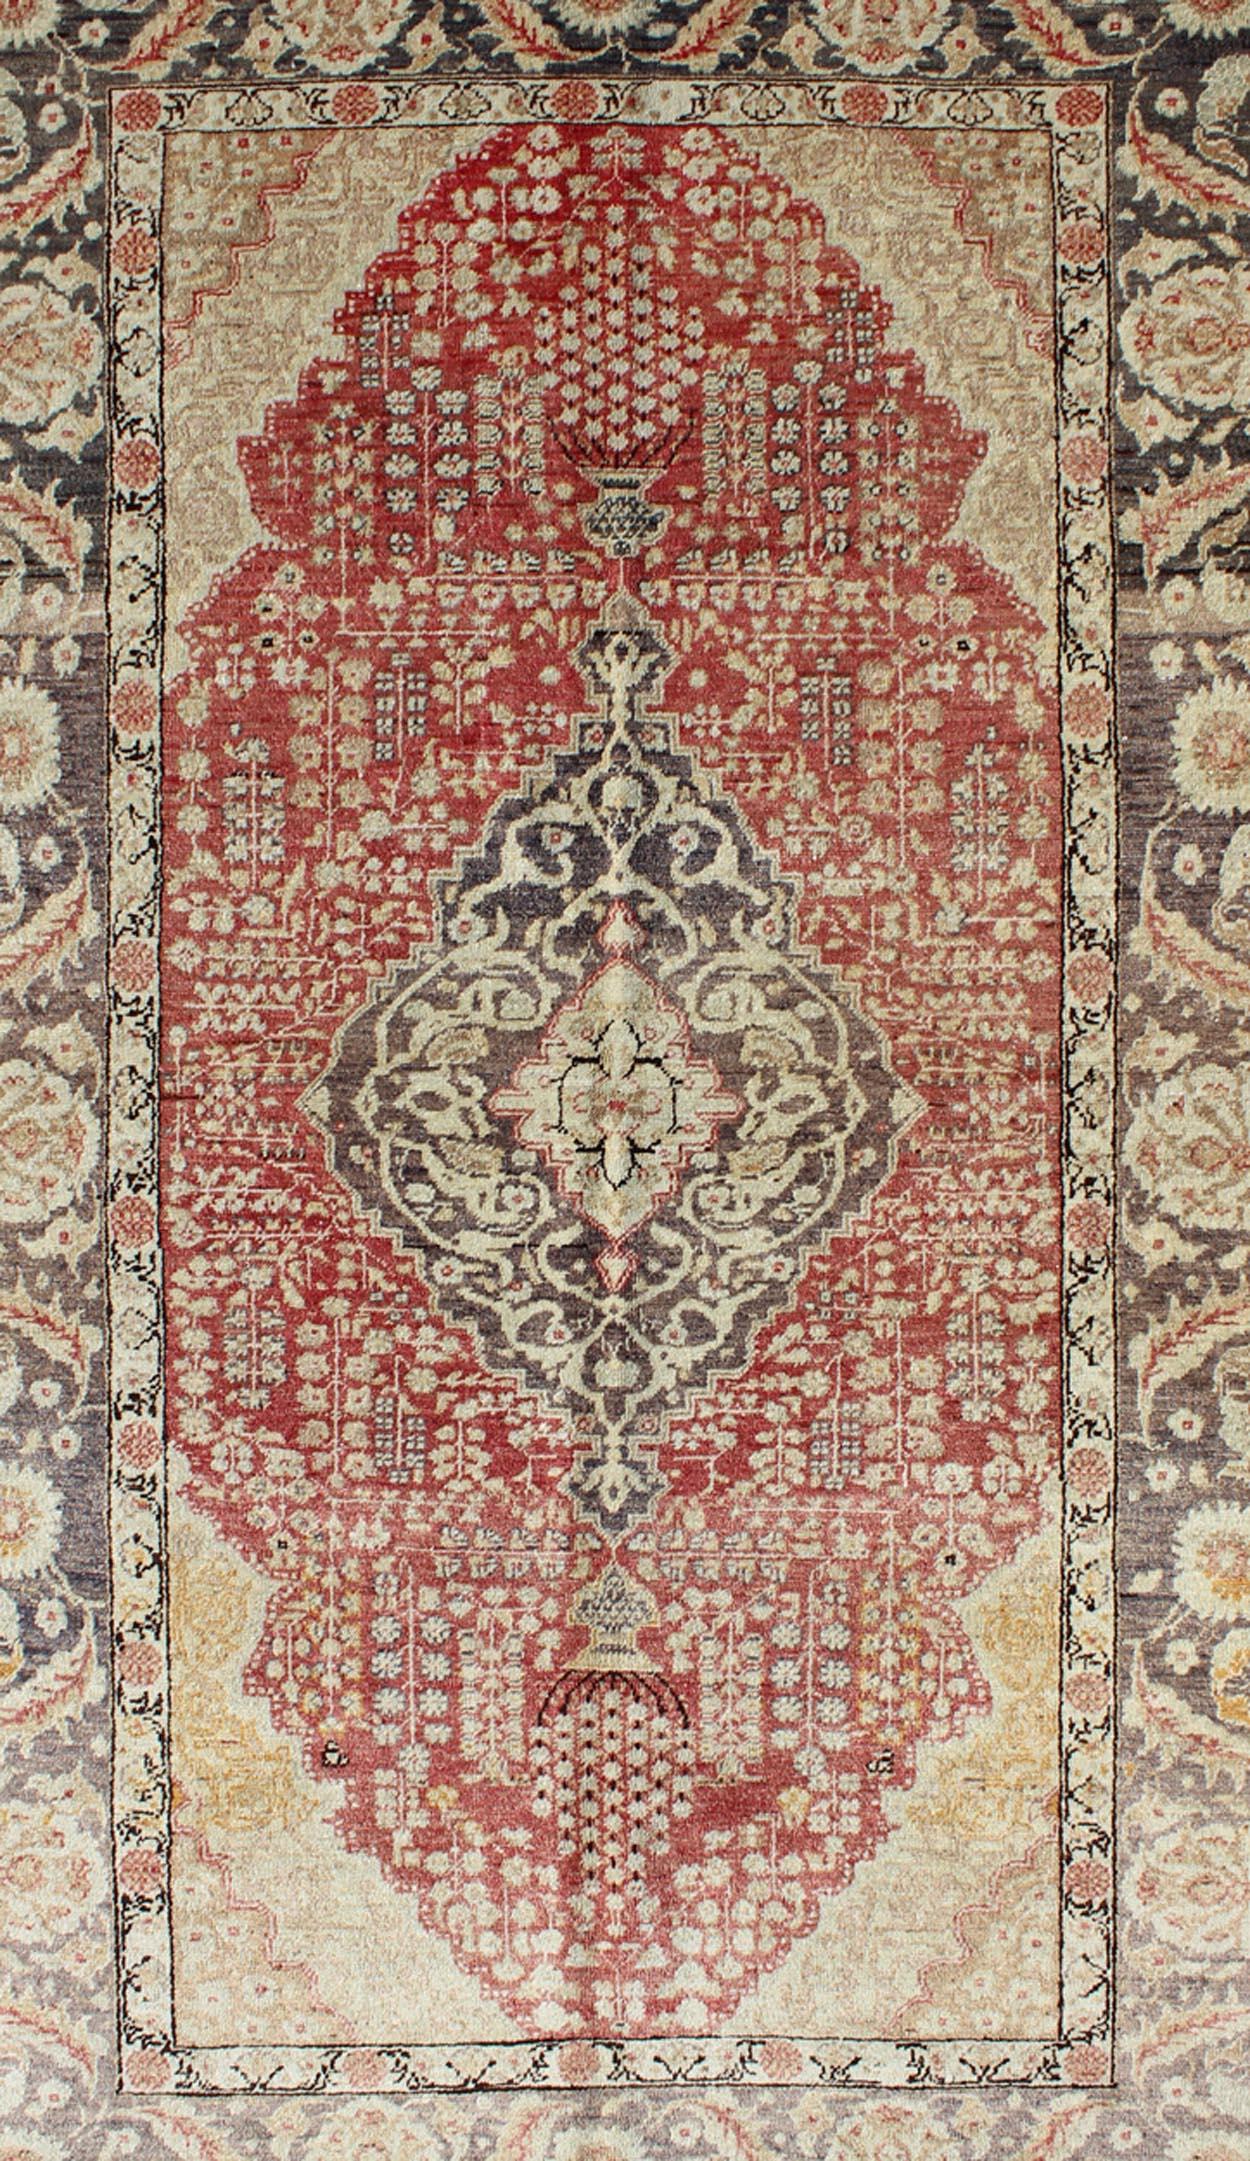 Antique Turkish Oushak rug with Floral Medallion Design in Red and Charcoal

Measures: 4'4 x 7'2

This antique Turkish Oushak carpet features a central medallion design, as well as patterns of smaller floral shapes and botanical elements in the